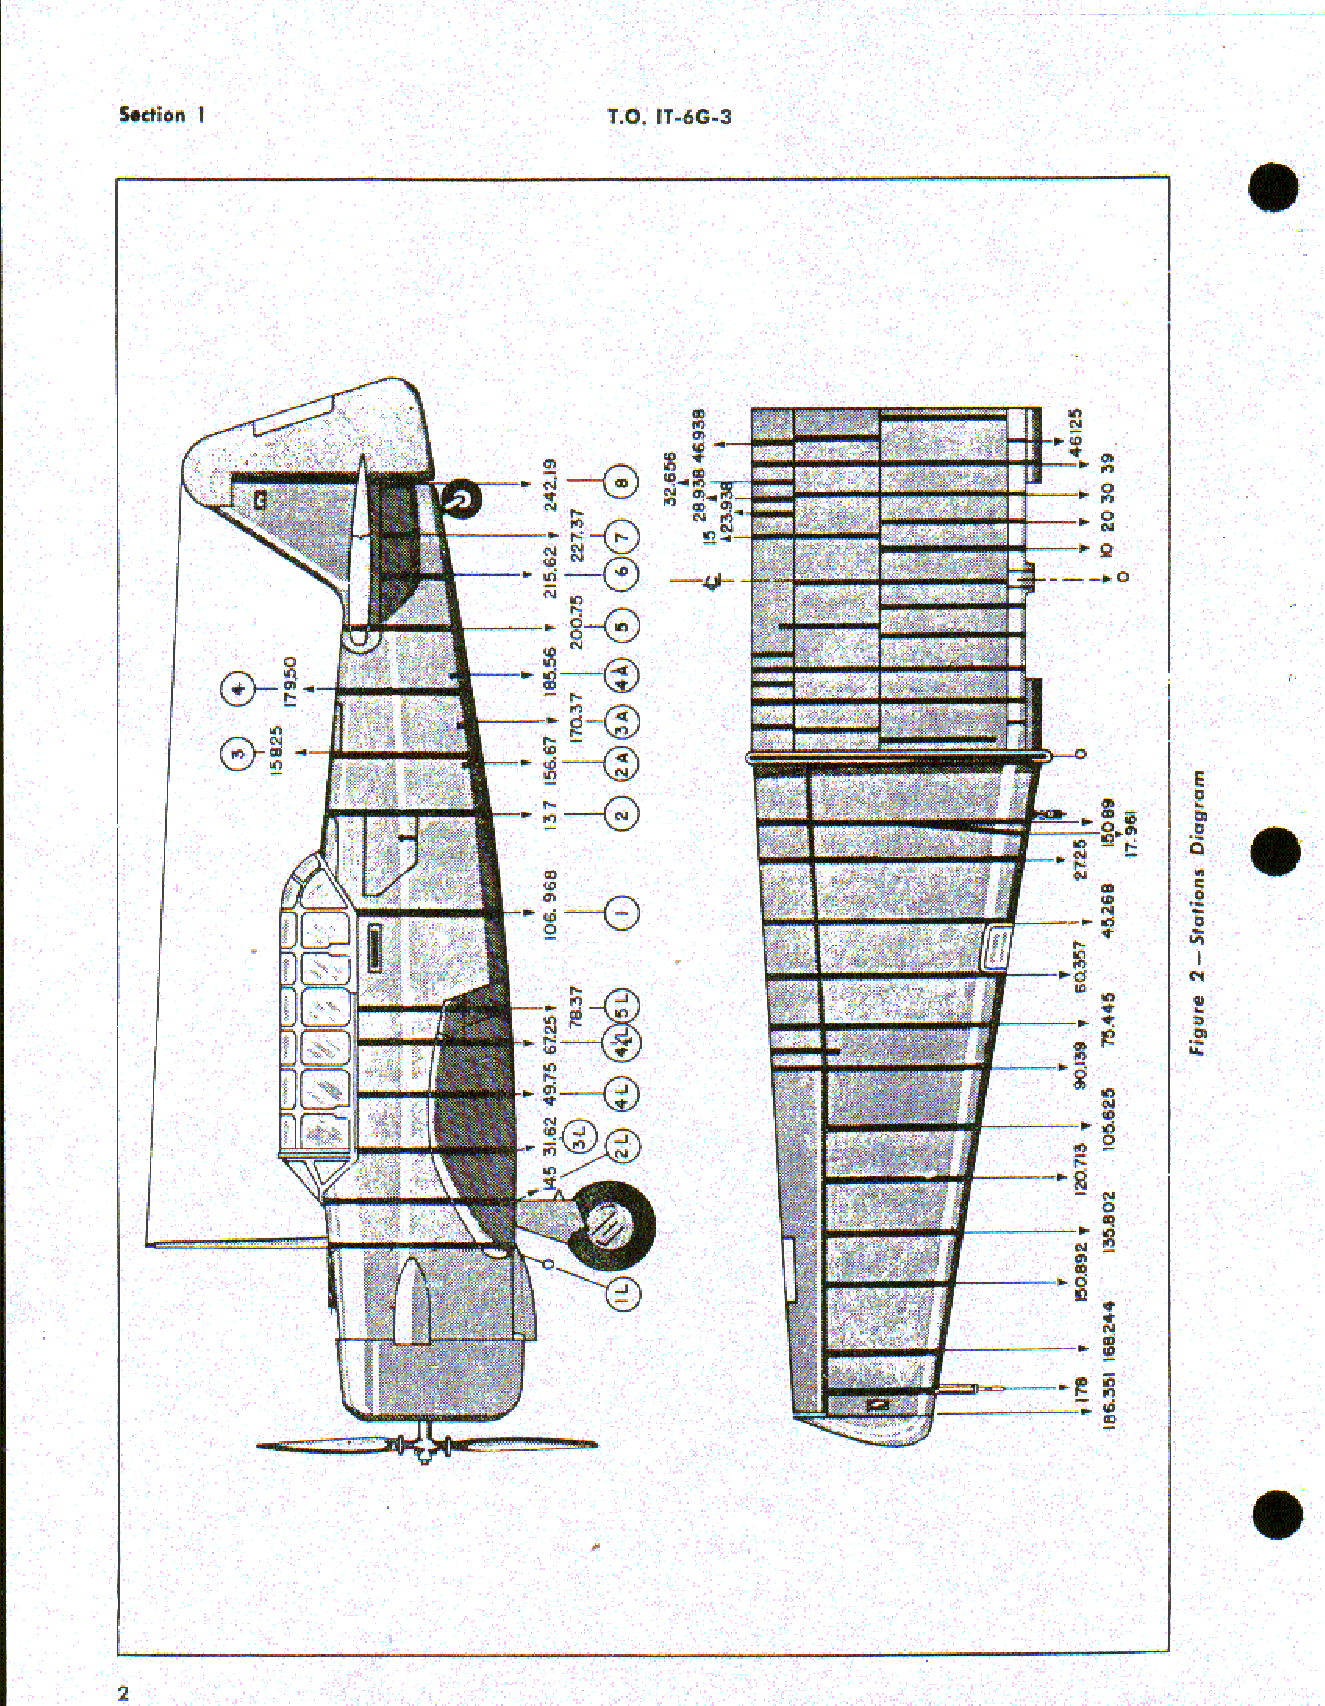 Sample page 8 from AirCorps Library document: Structural Repair For T-6, SNJ-3, SNJ-4, SNJ-5, and SNJ-6 Aircraft